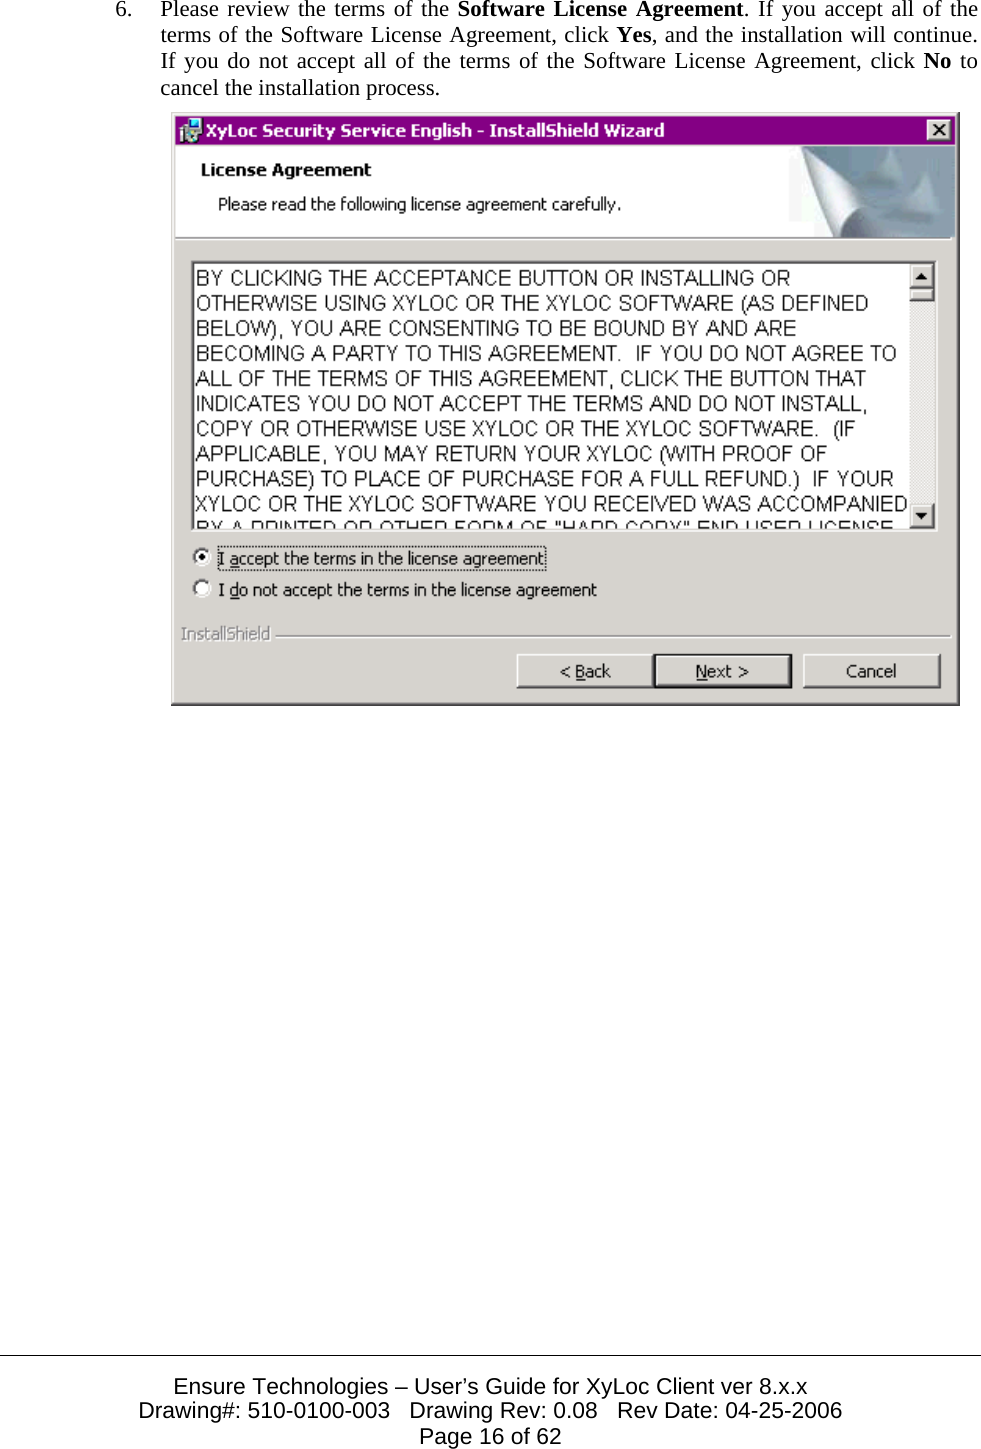  Ensure Technologies – User’s Guide for XyLoc Client ver 8.x.x Drawing#: 510-0100-003   Drawing Rev: 0.08   Rev Date: 04-25-2006 Page 16 of 62 6. Please review the terms of the Software License Agreement. If you accept all of the terms of the Software License Agreement, click Yes, and the installation will continue. If you do not accept all of the terms of the Software License Agreement, click No to cancel the installation process.   